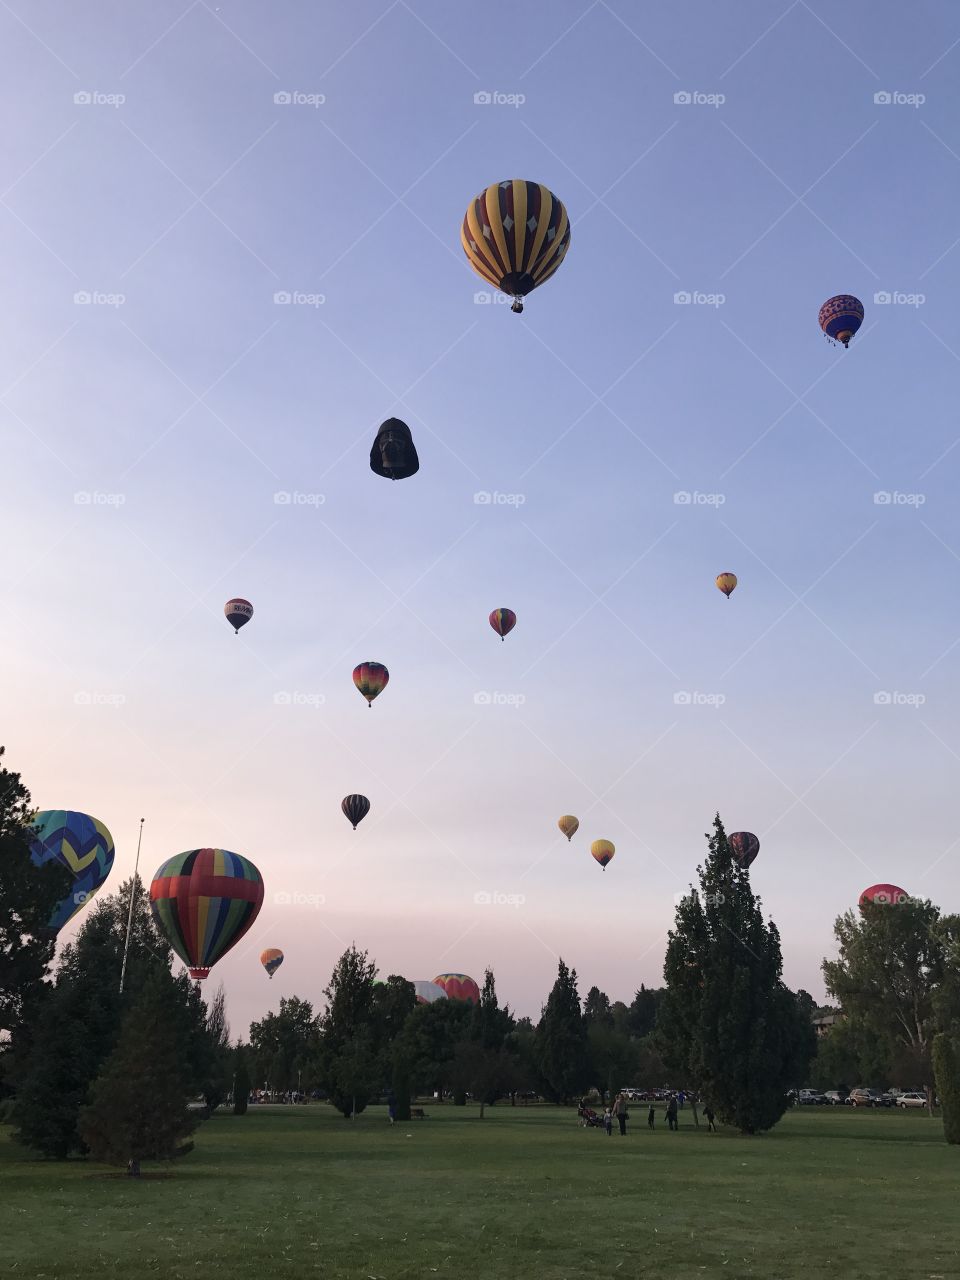 Photo taken at a local park for the Spirit of Boise hot air balloon classic. Taken at sunrise when all the hot air balloons ascend at the same time.  